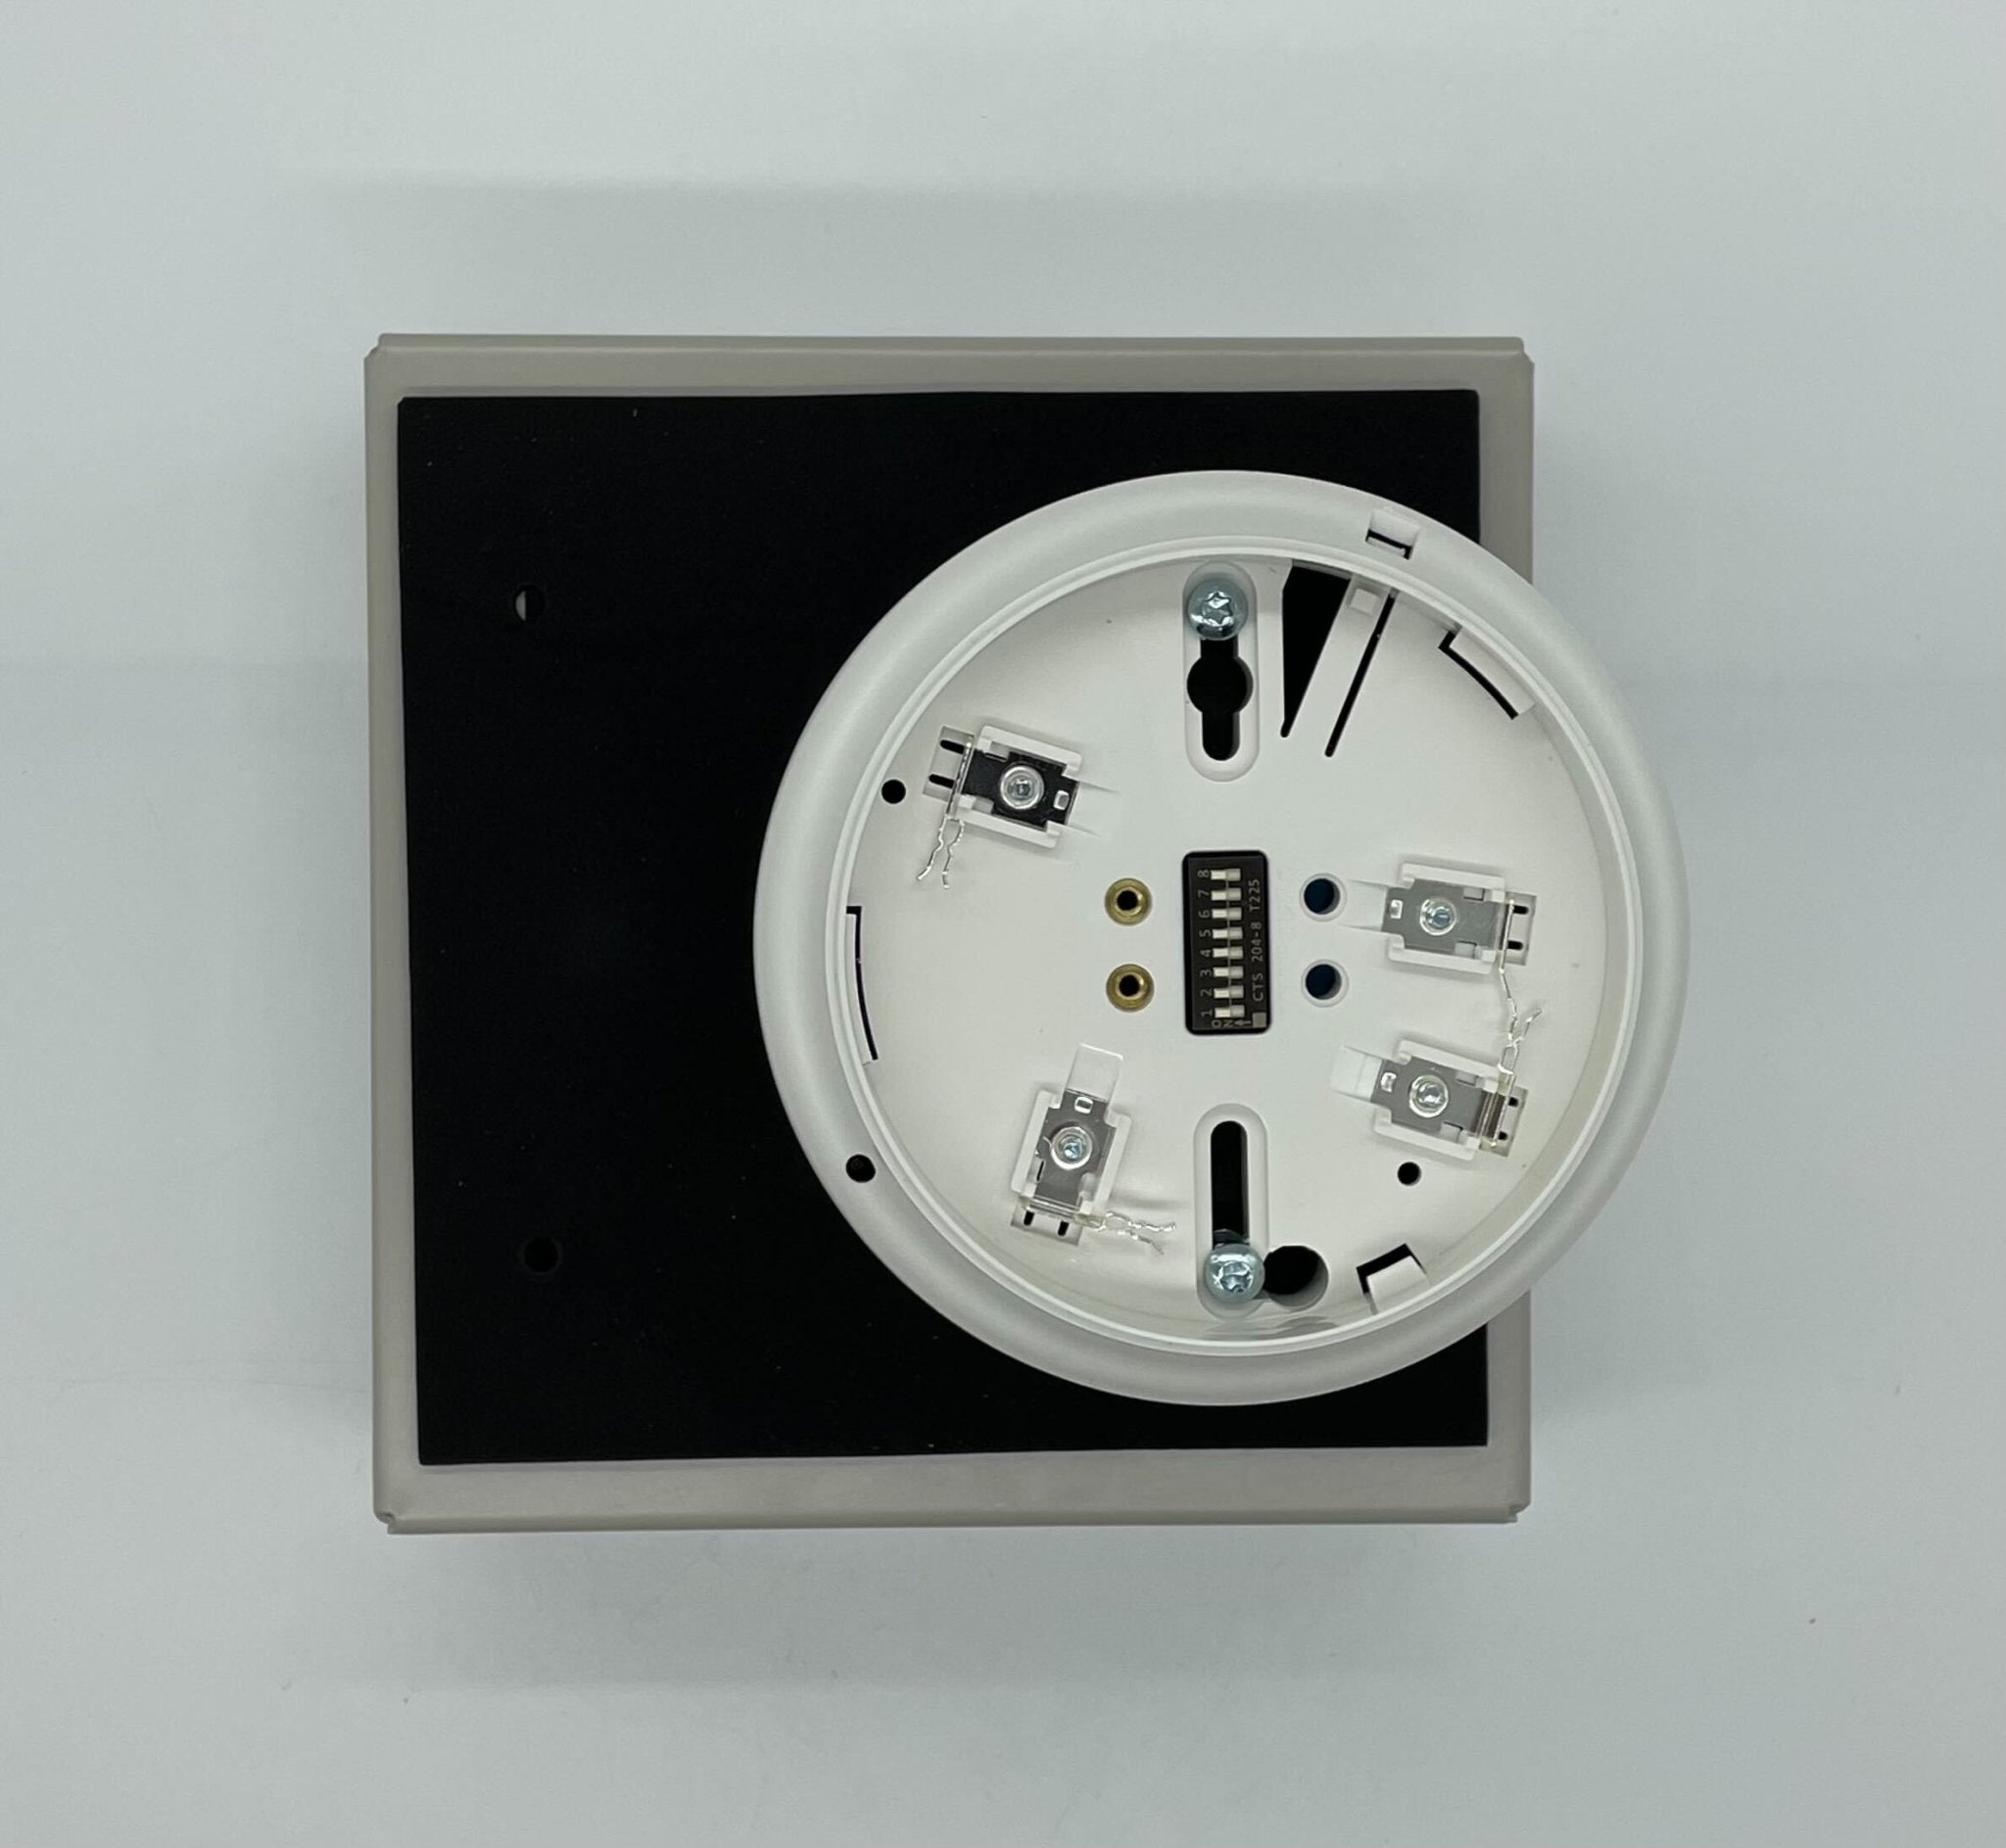 Simplex 4098-9751 In-Duct Sensor - The Fire Alarm Supplier